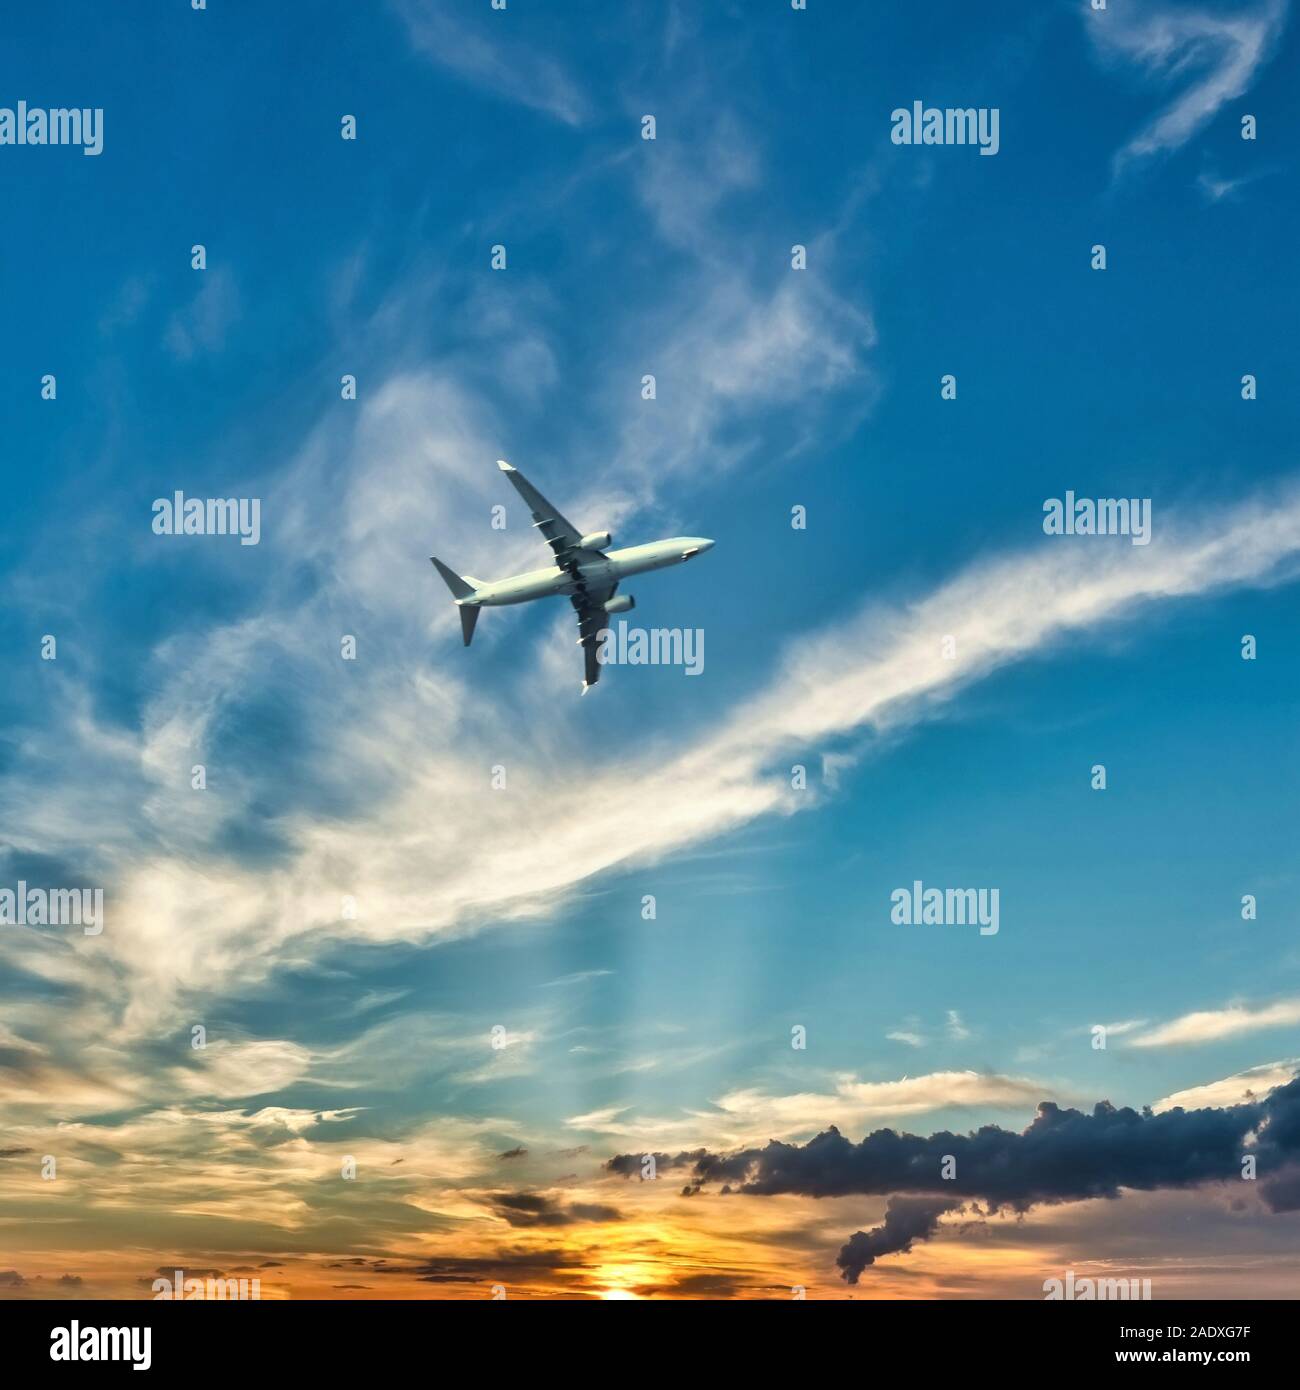 Square photo of big airplane above Kos island. Plane is captured from boath before landing. Sky is with sunset and dramatic clouds. Stock Photo